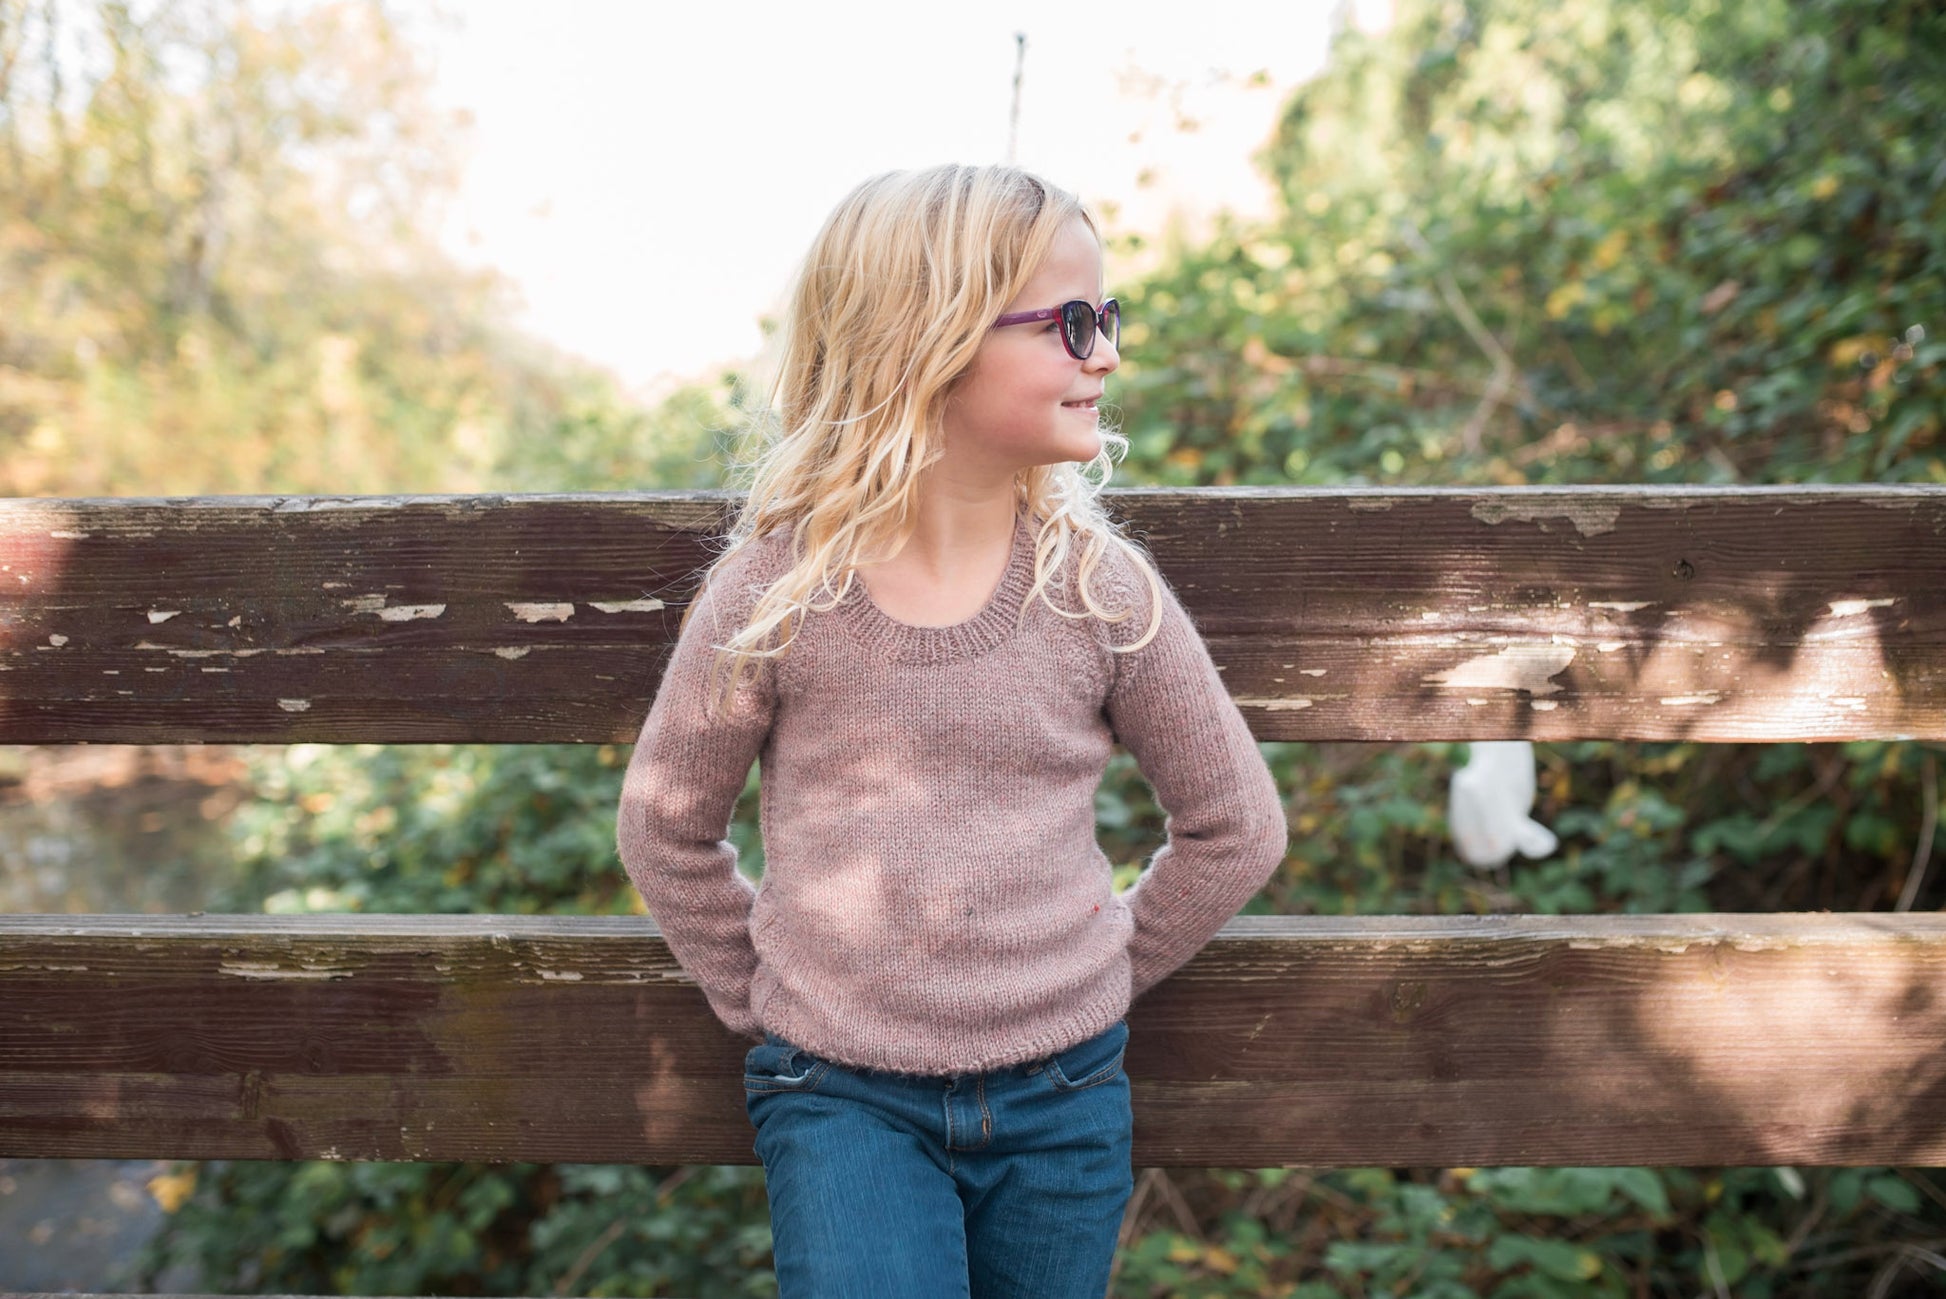 A young girl leans against a wooden railing, looking off camera. She wears a light purple sweater, knit with garter stitch embellishment around the seams and a scoop neck, with a pair of blue jeans.